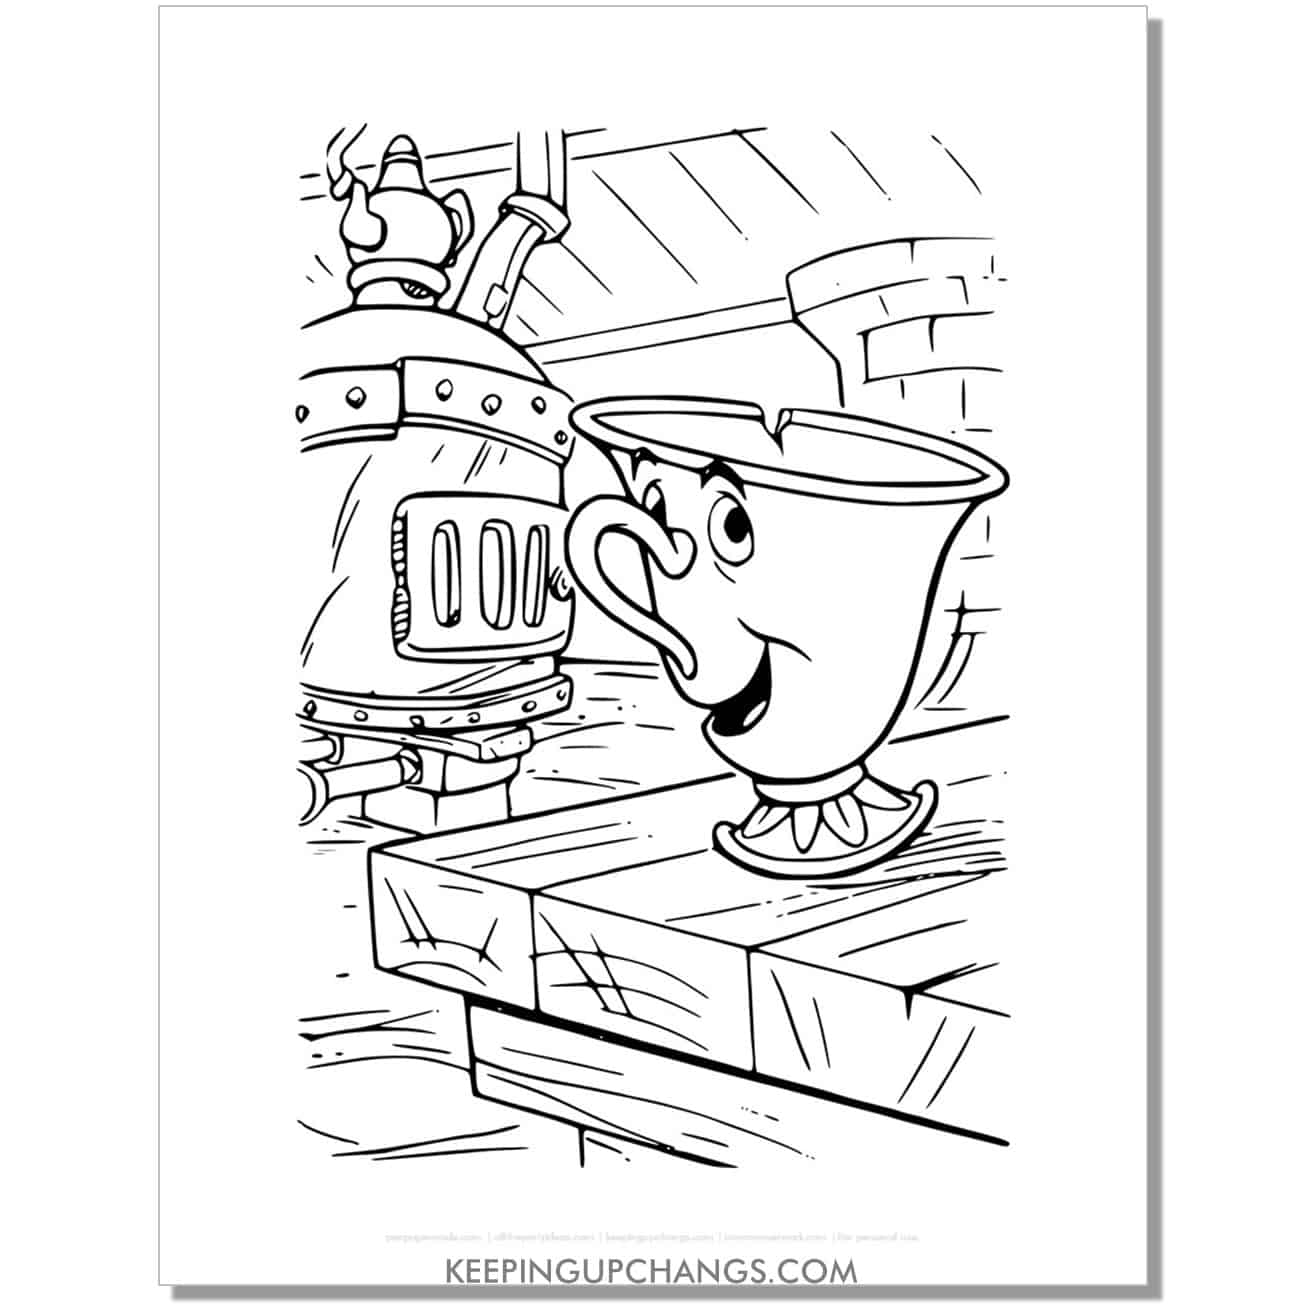 beauty and beast chip in furnace room coloring page, sheet.